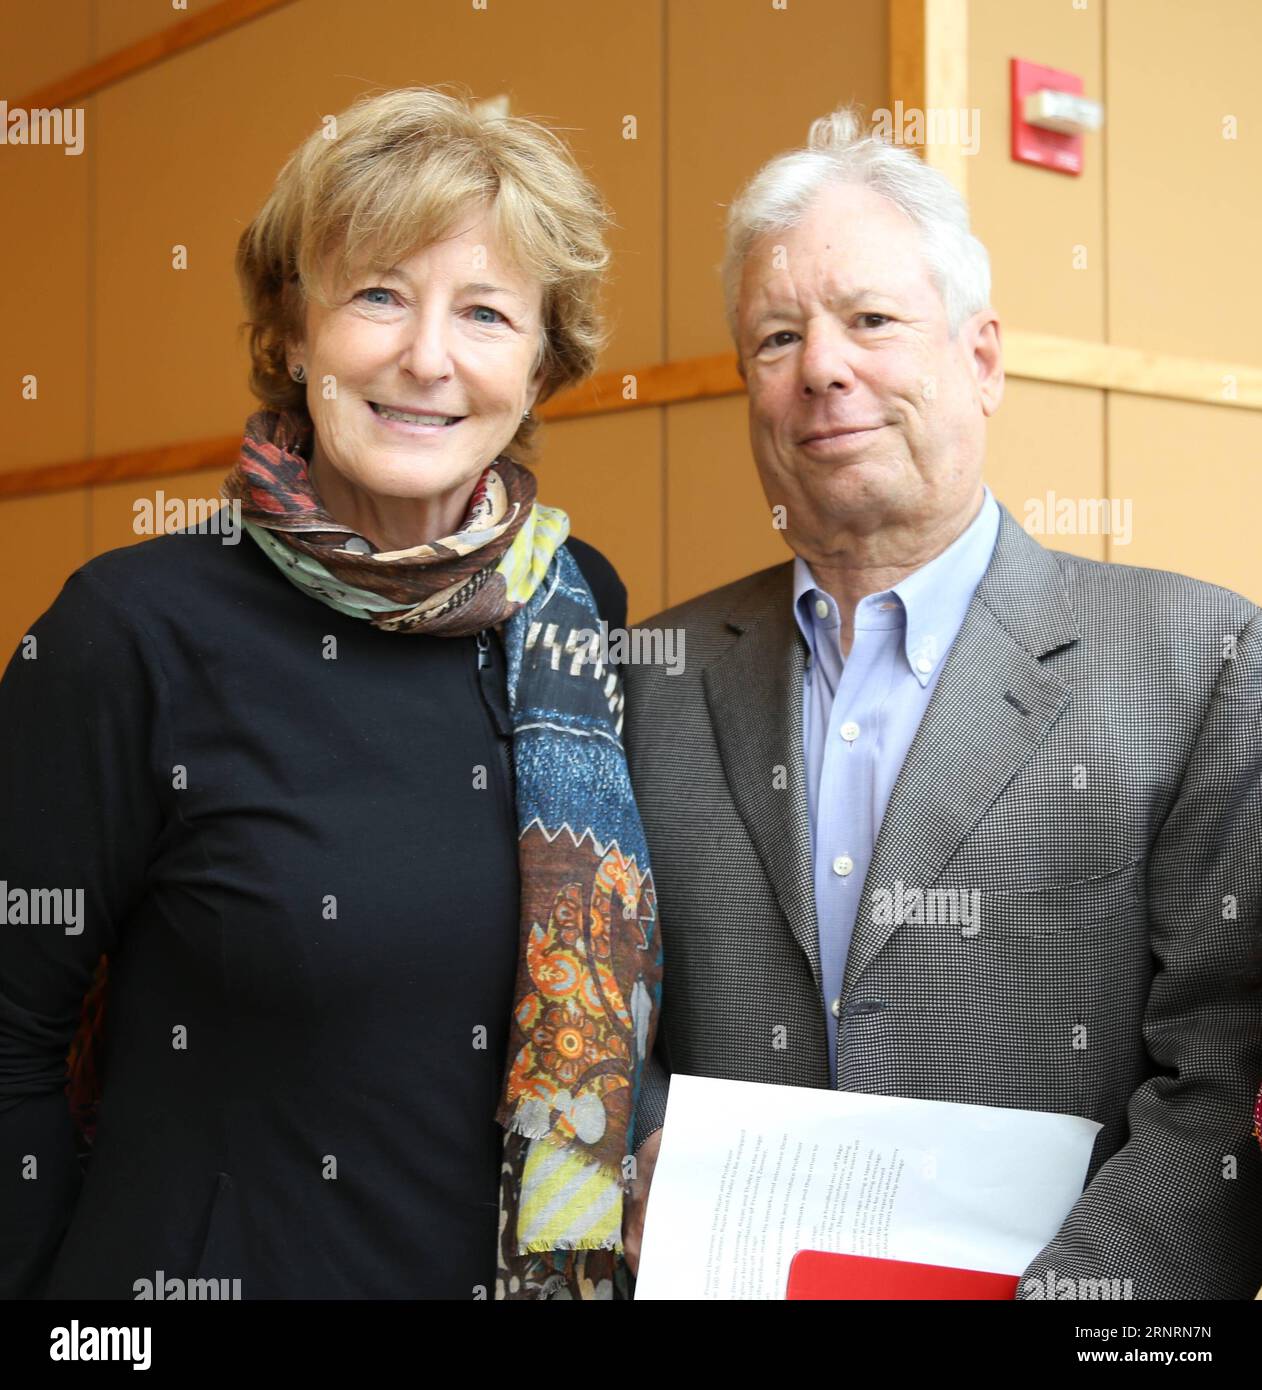 Themen der Woche (171009) -- CHICAGO, Oct. 9, 2017 -- Richard H. Thaler (R), 2017 Nobel Prize winner in Economics, poses for photos with his wife during a press conference at University of Chicago Booth School of Business in Chicago, the United States, on Oct. 9, 2017. The 2017 Nobel Prize in Economics was awarded to Richard H. Thaler for his contributions to behavioural economics, announced the Royal Swedish Academy of Sciences on Monday. ) U.S.-CHICAGO-NOBEL PRIZE IN ECONOMICS-RICHARD H. THALER-PRESS CONFERENCE WangxQiang PUBLICATIONxNOTxINxCHN Stock Photo